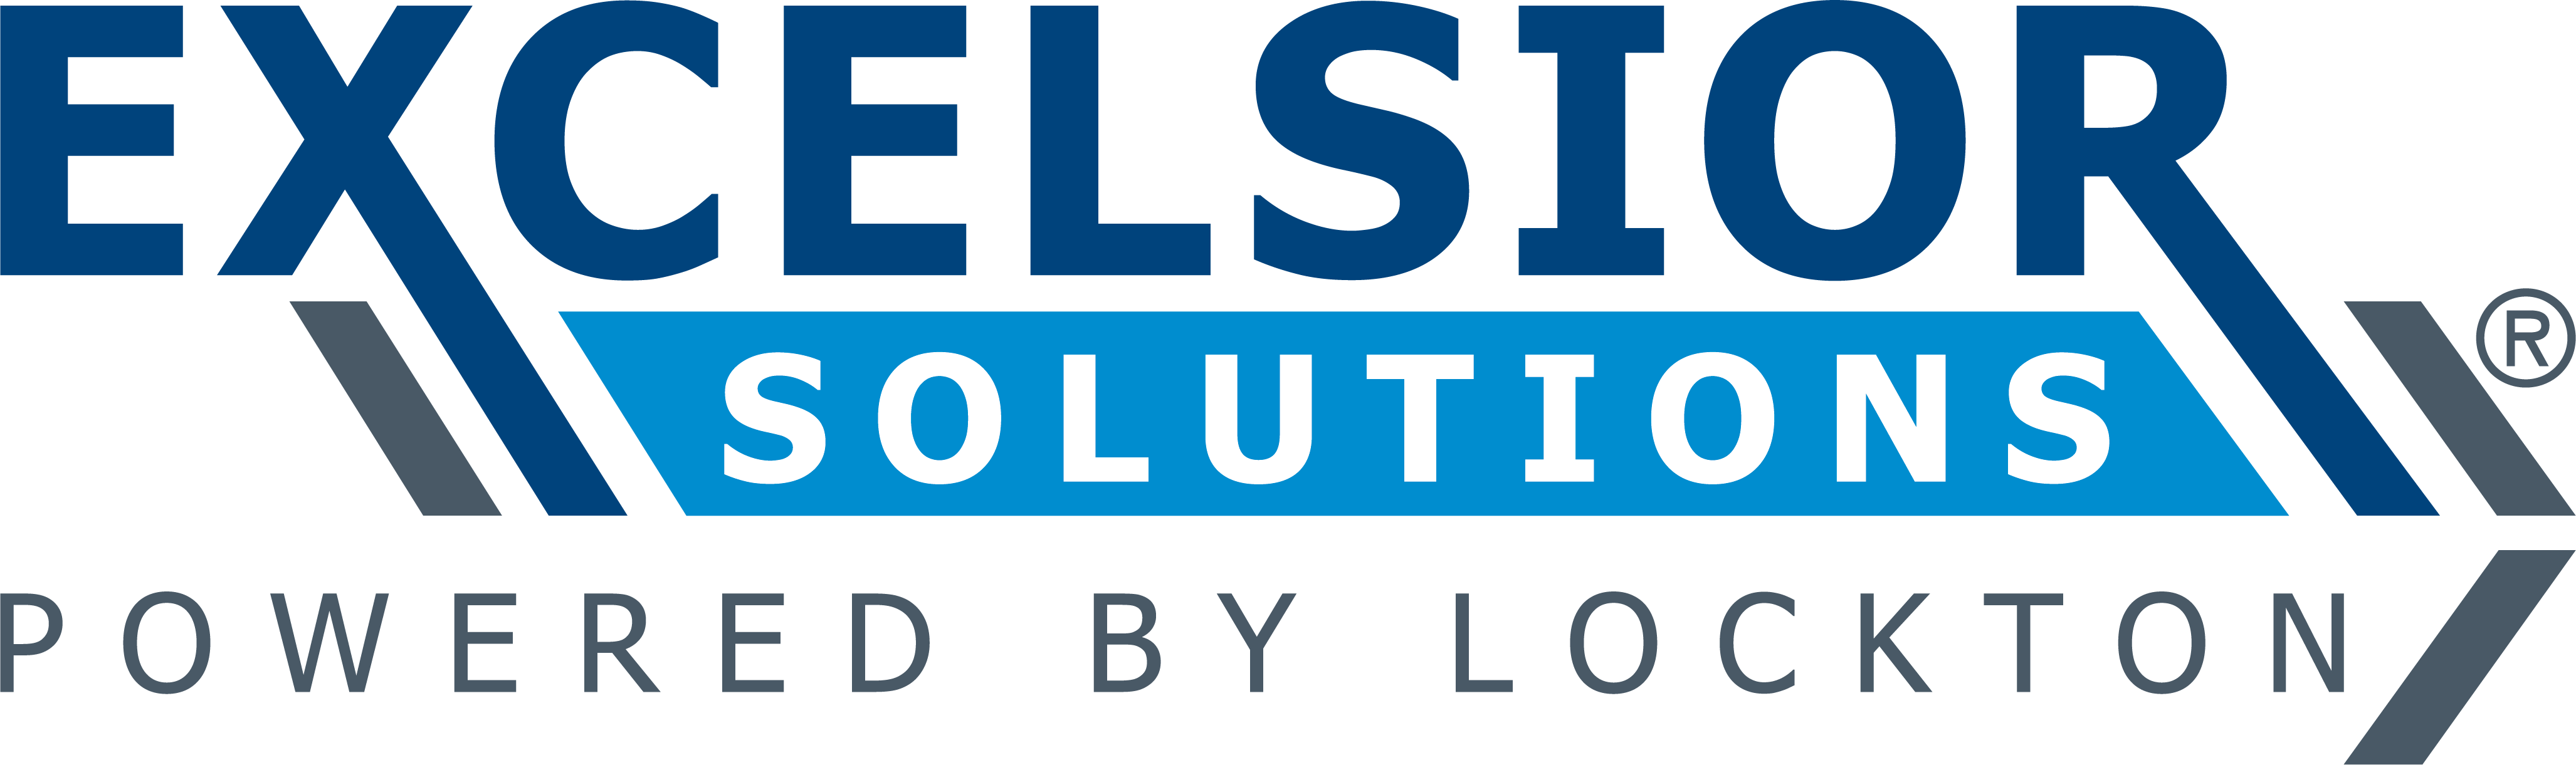 Excelsior Solutions